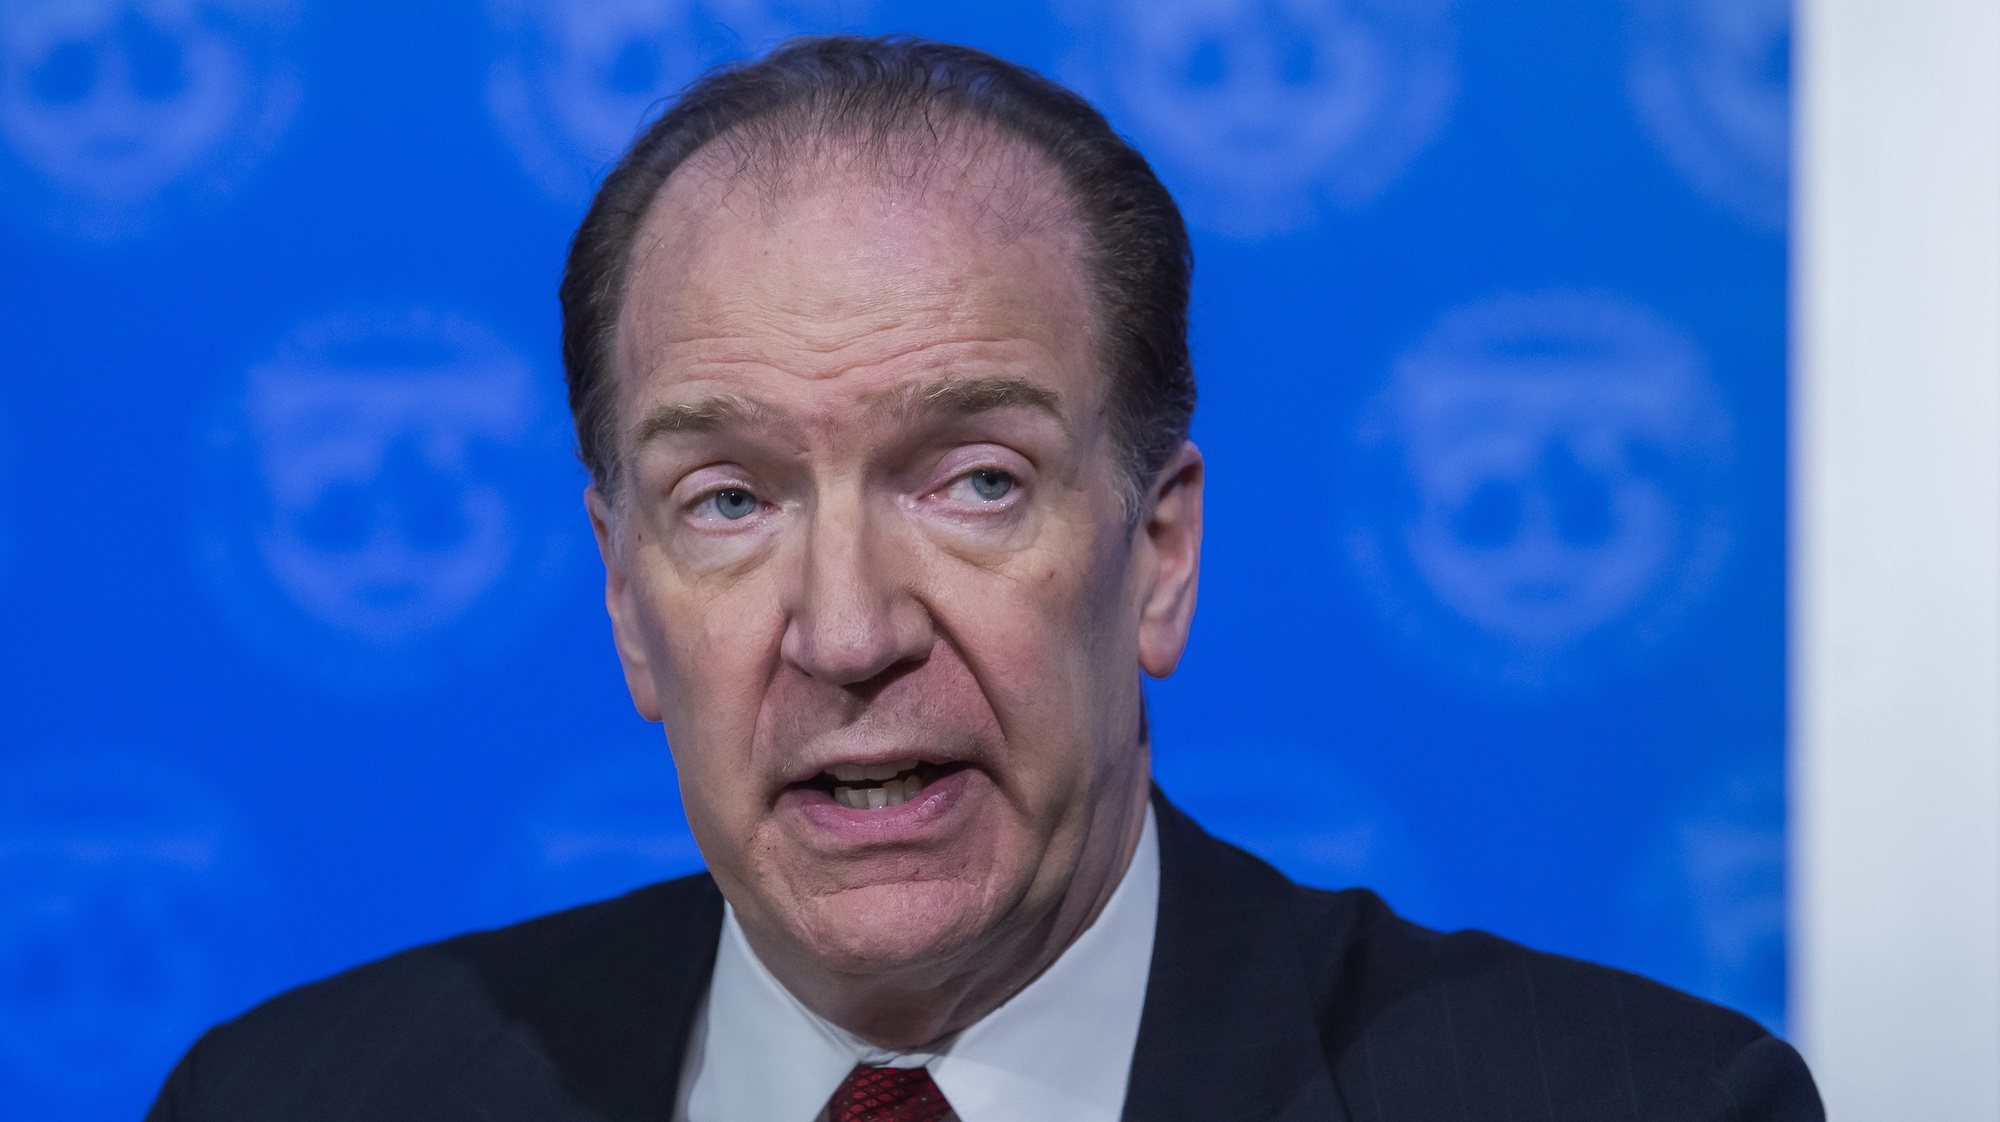 epa08269366 World Bank Group President David Malpass participates in a joint press conference with International Monetary Fund Managing (IMF) Director Kristalina Georgieva  (unseen) on the organizations response to the COVID-19 coronavirus outbreak at the IMF headquarters in Washington, DC, USA, 04 March 2020. The two international organizations have also changed their upcoming annual spring meetings to a virtual gathering due to the COVID-19 coronavirus outbreak.  EPA/ERIK S. LESSER